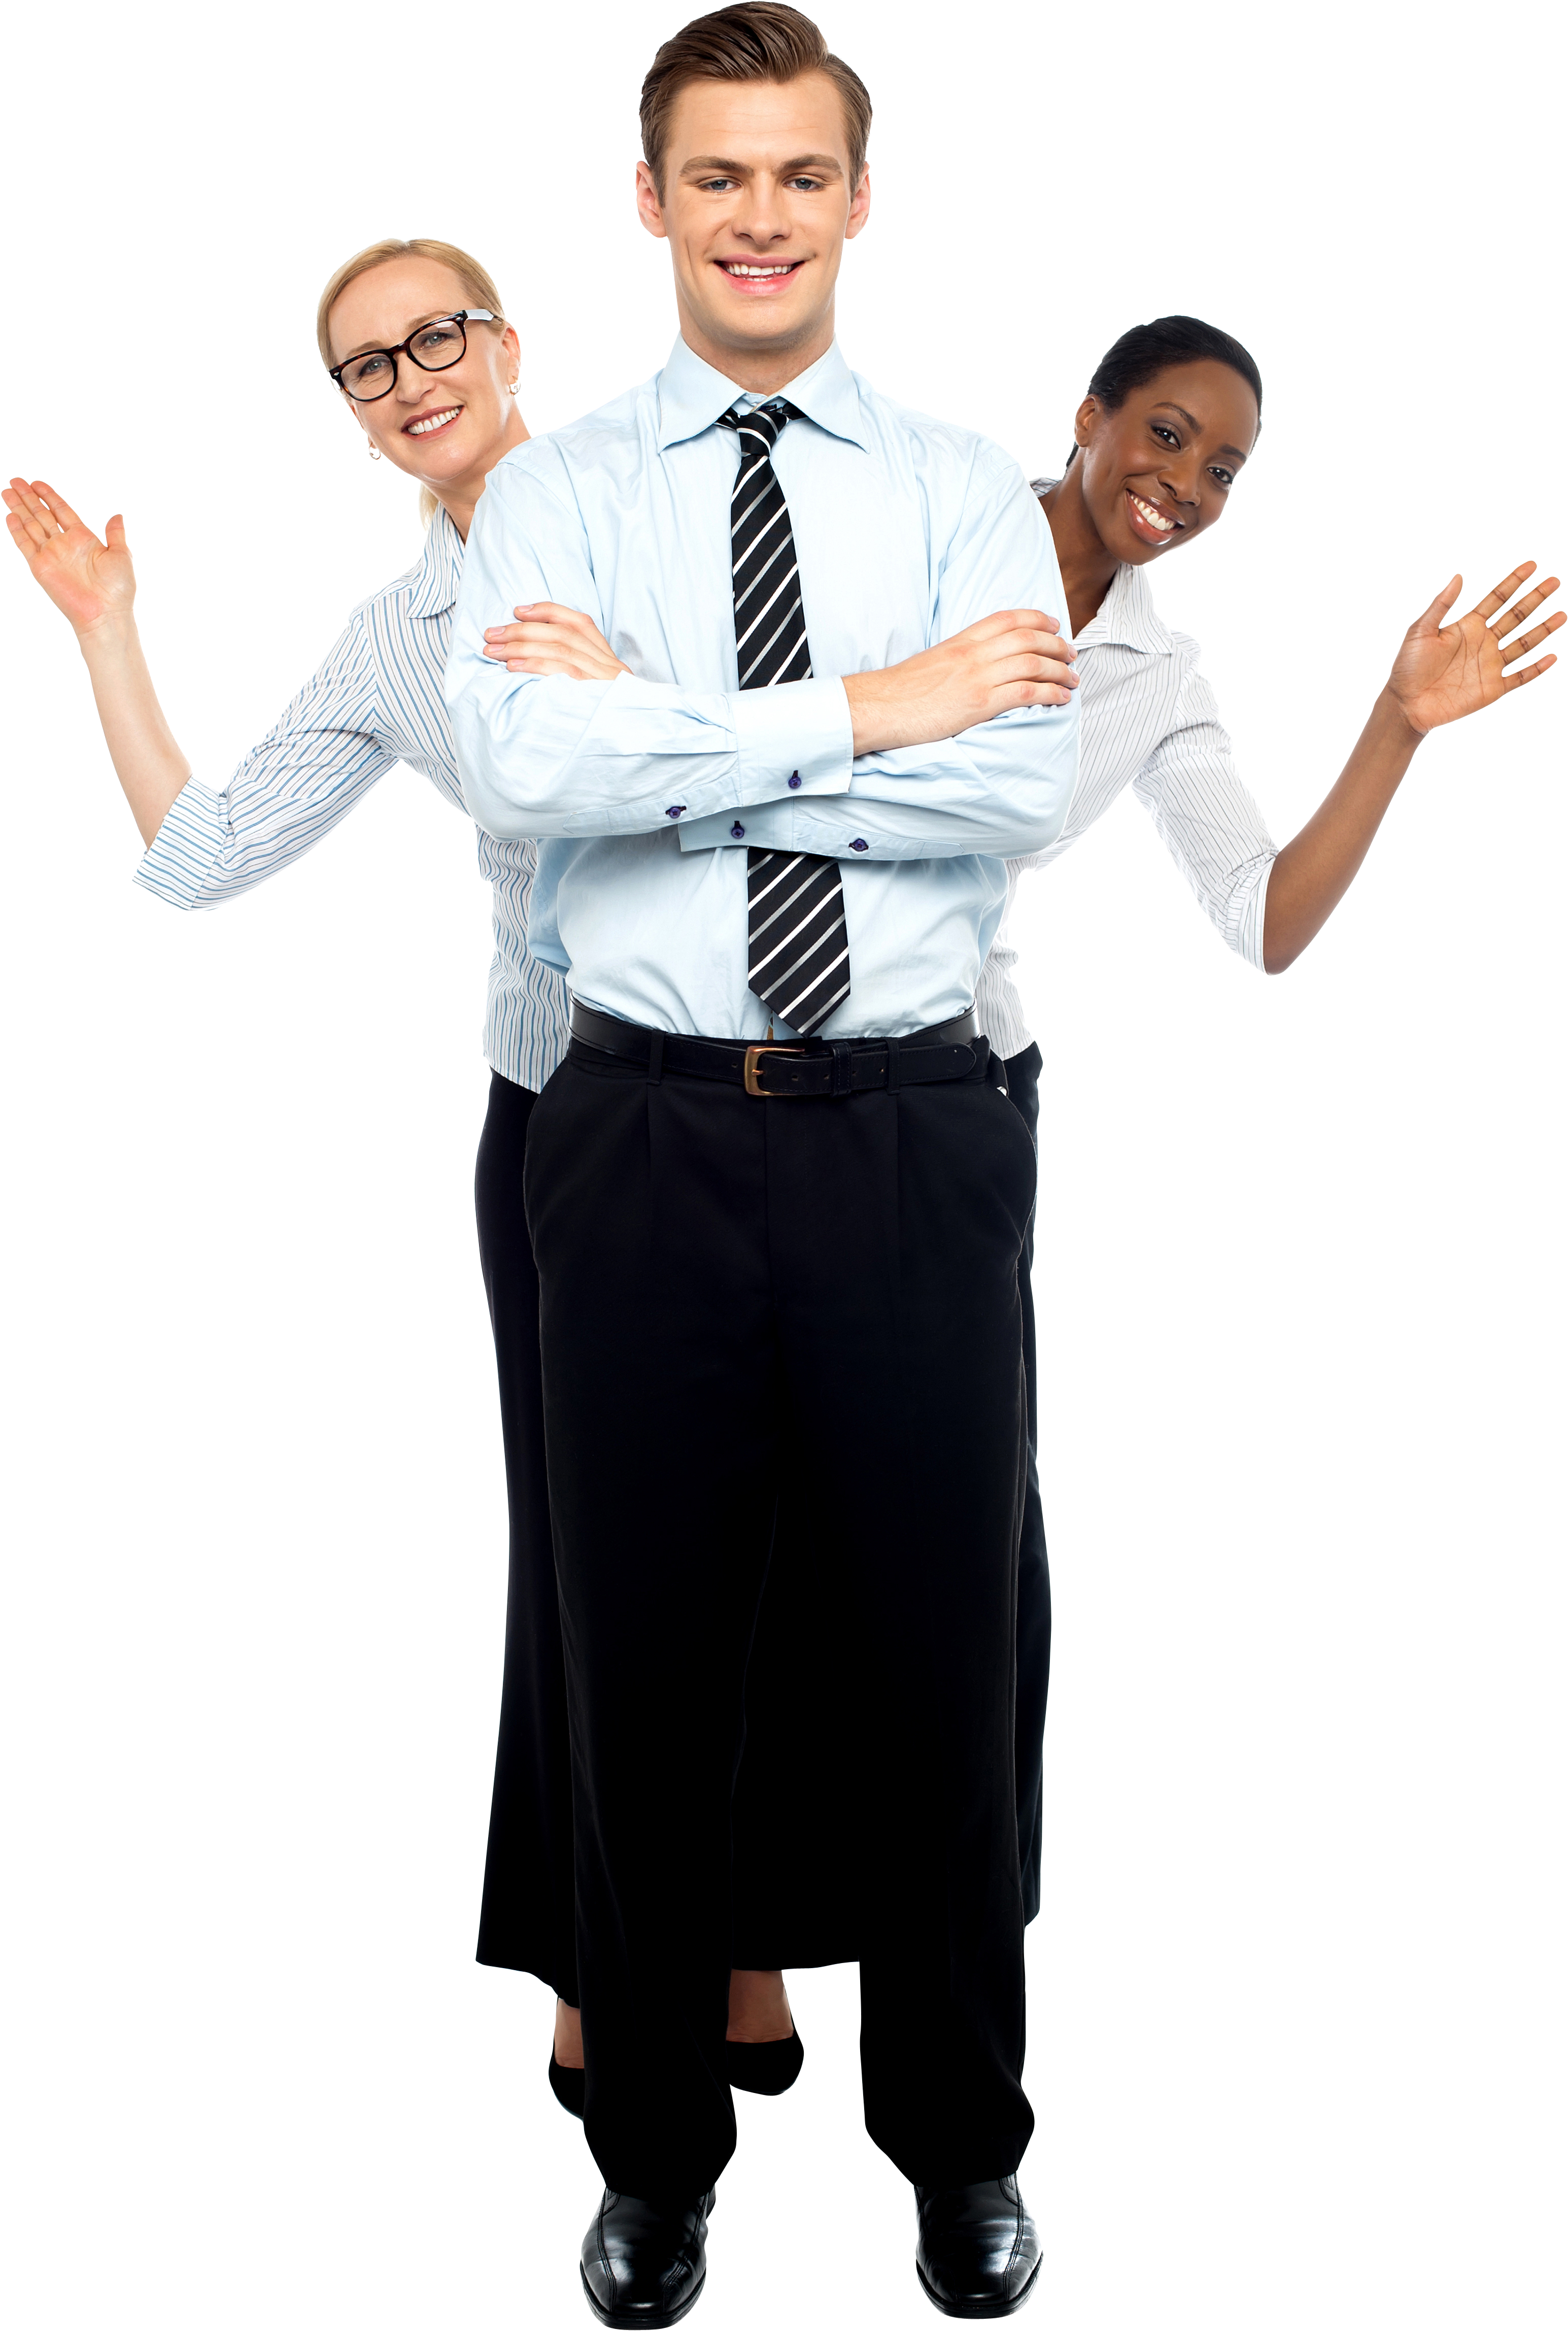 Diverse Business Team Confidence PNG image